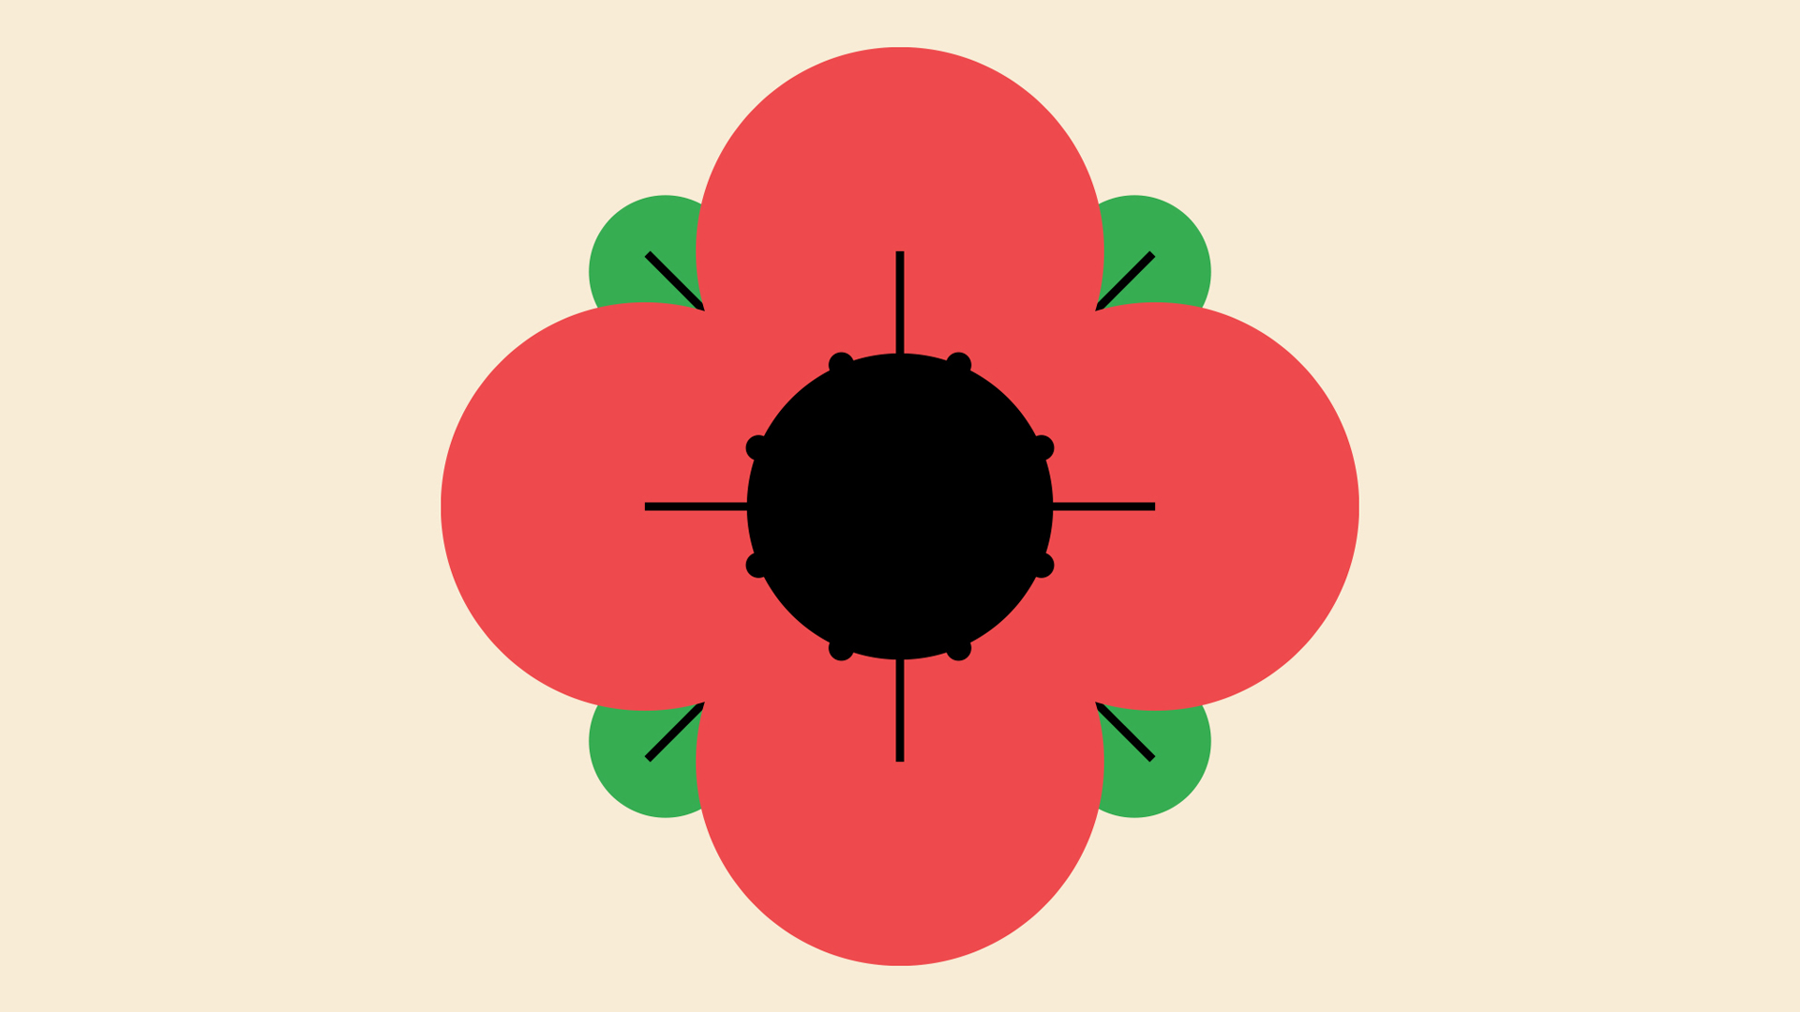 An illustration of a red poppy with green leaves on a magnolia background.